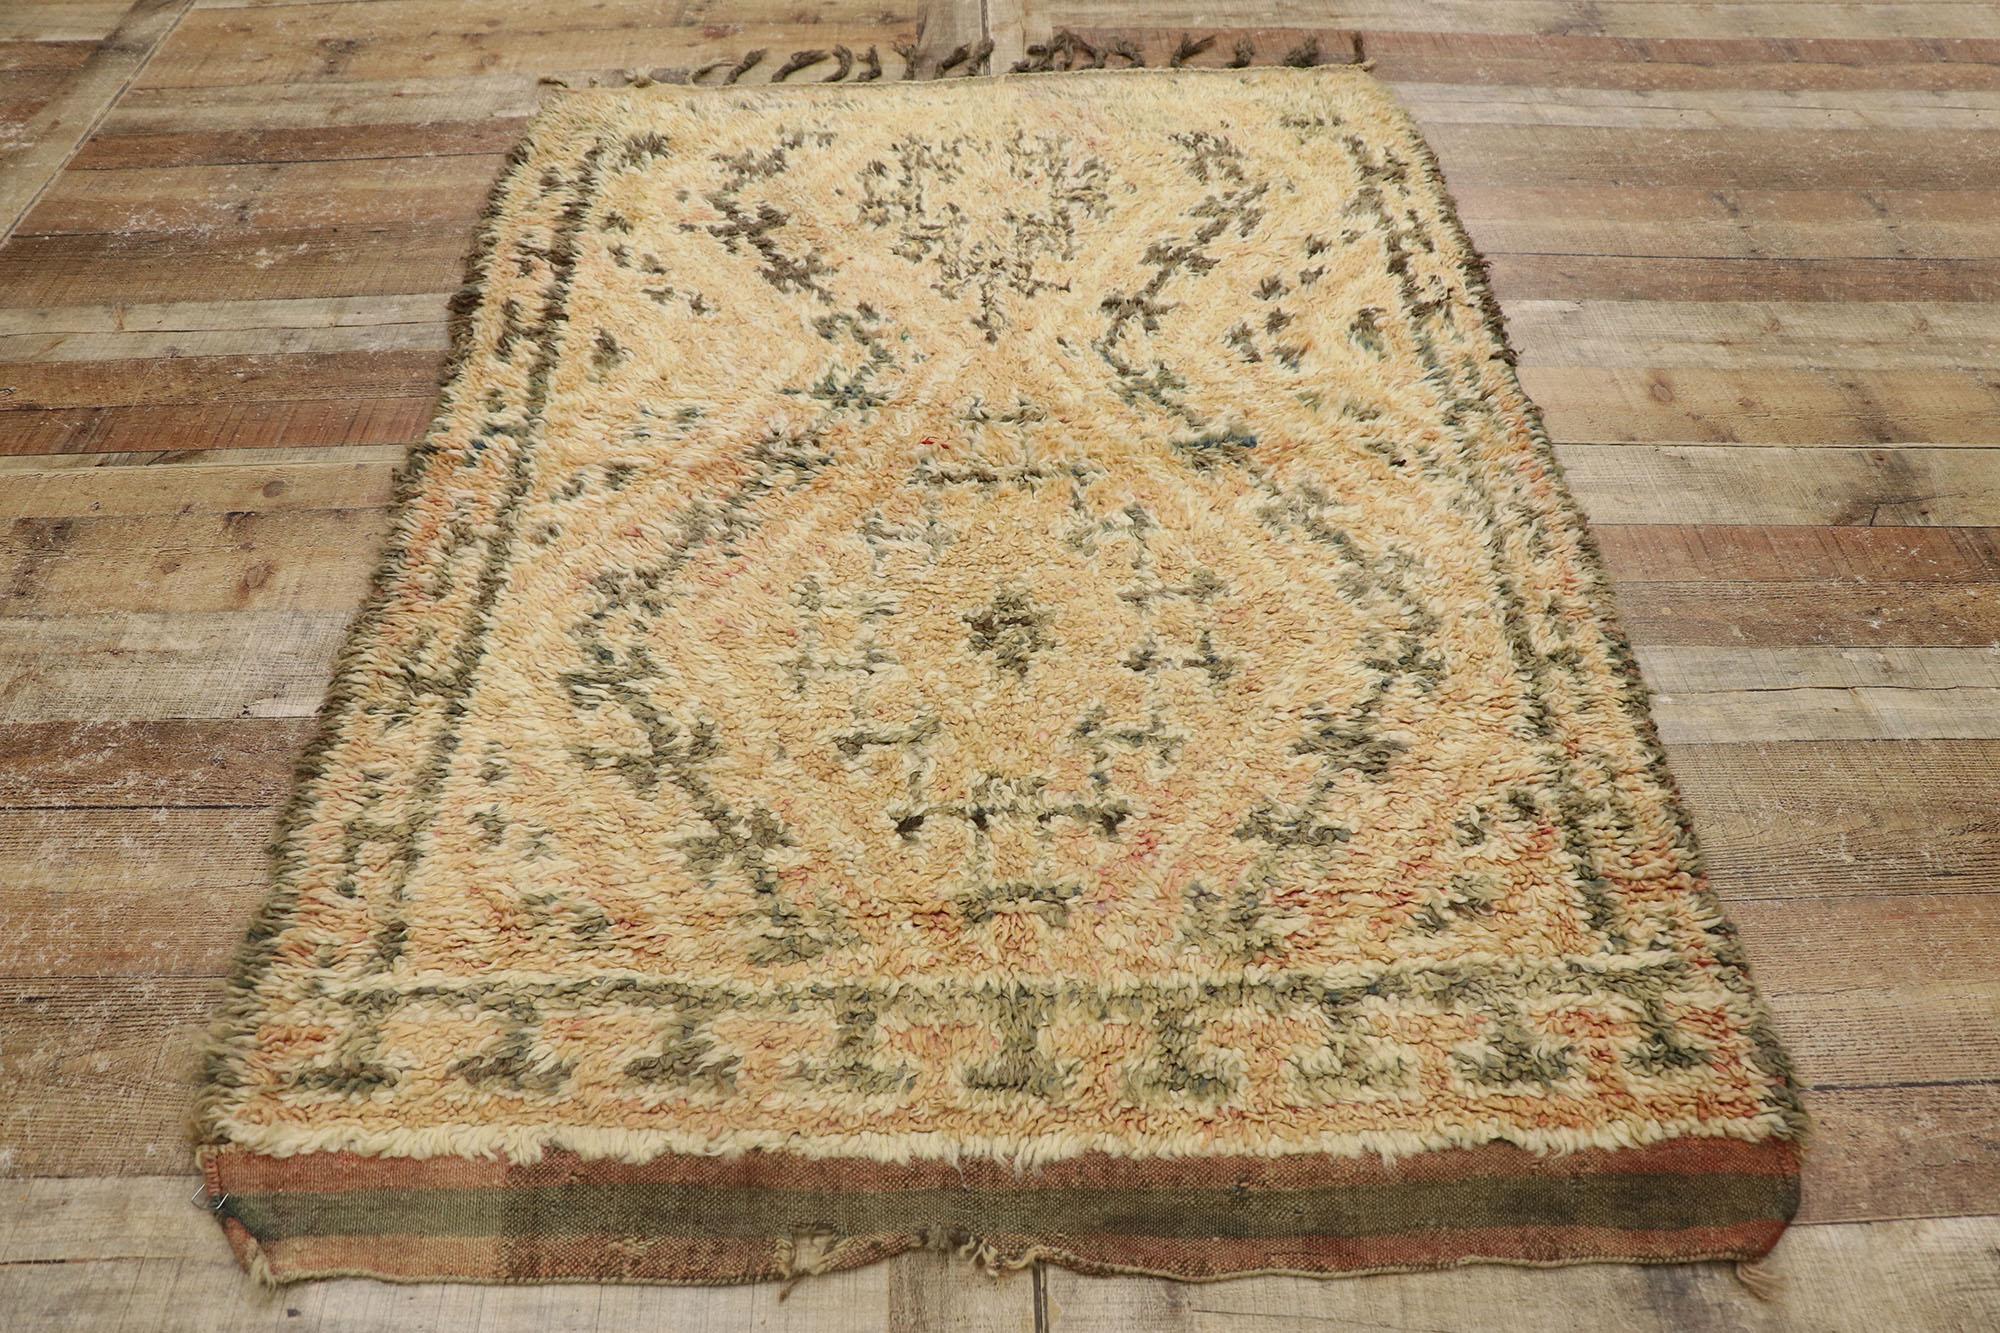 Wool Vintage Berber Moroccan Azilal Rug, Tribal Style Meets Neutral Boho Chic For Sale